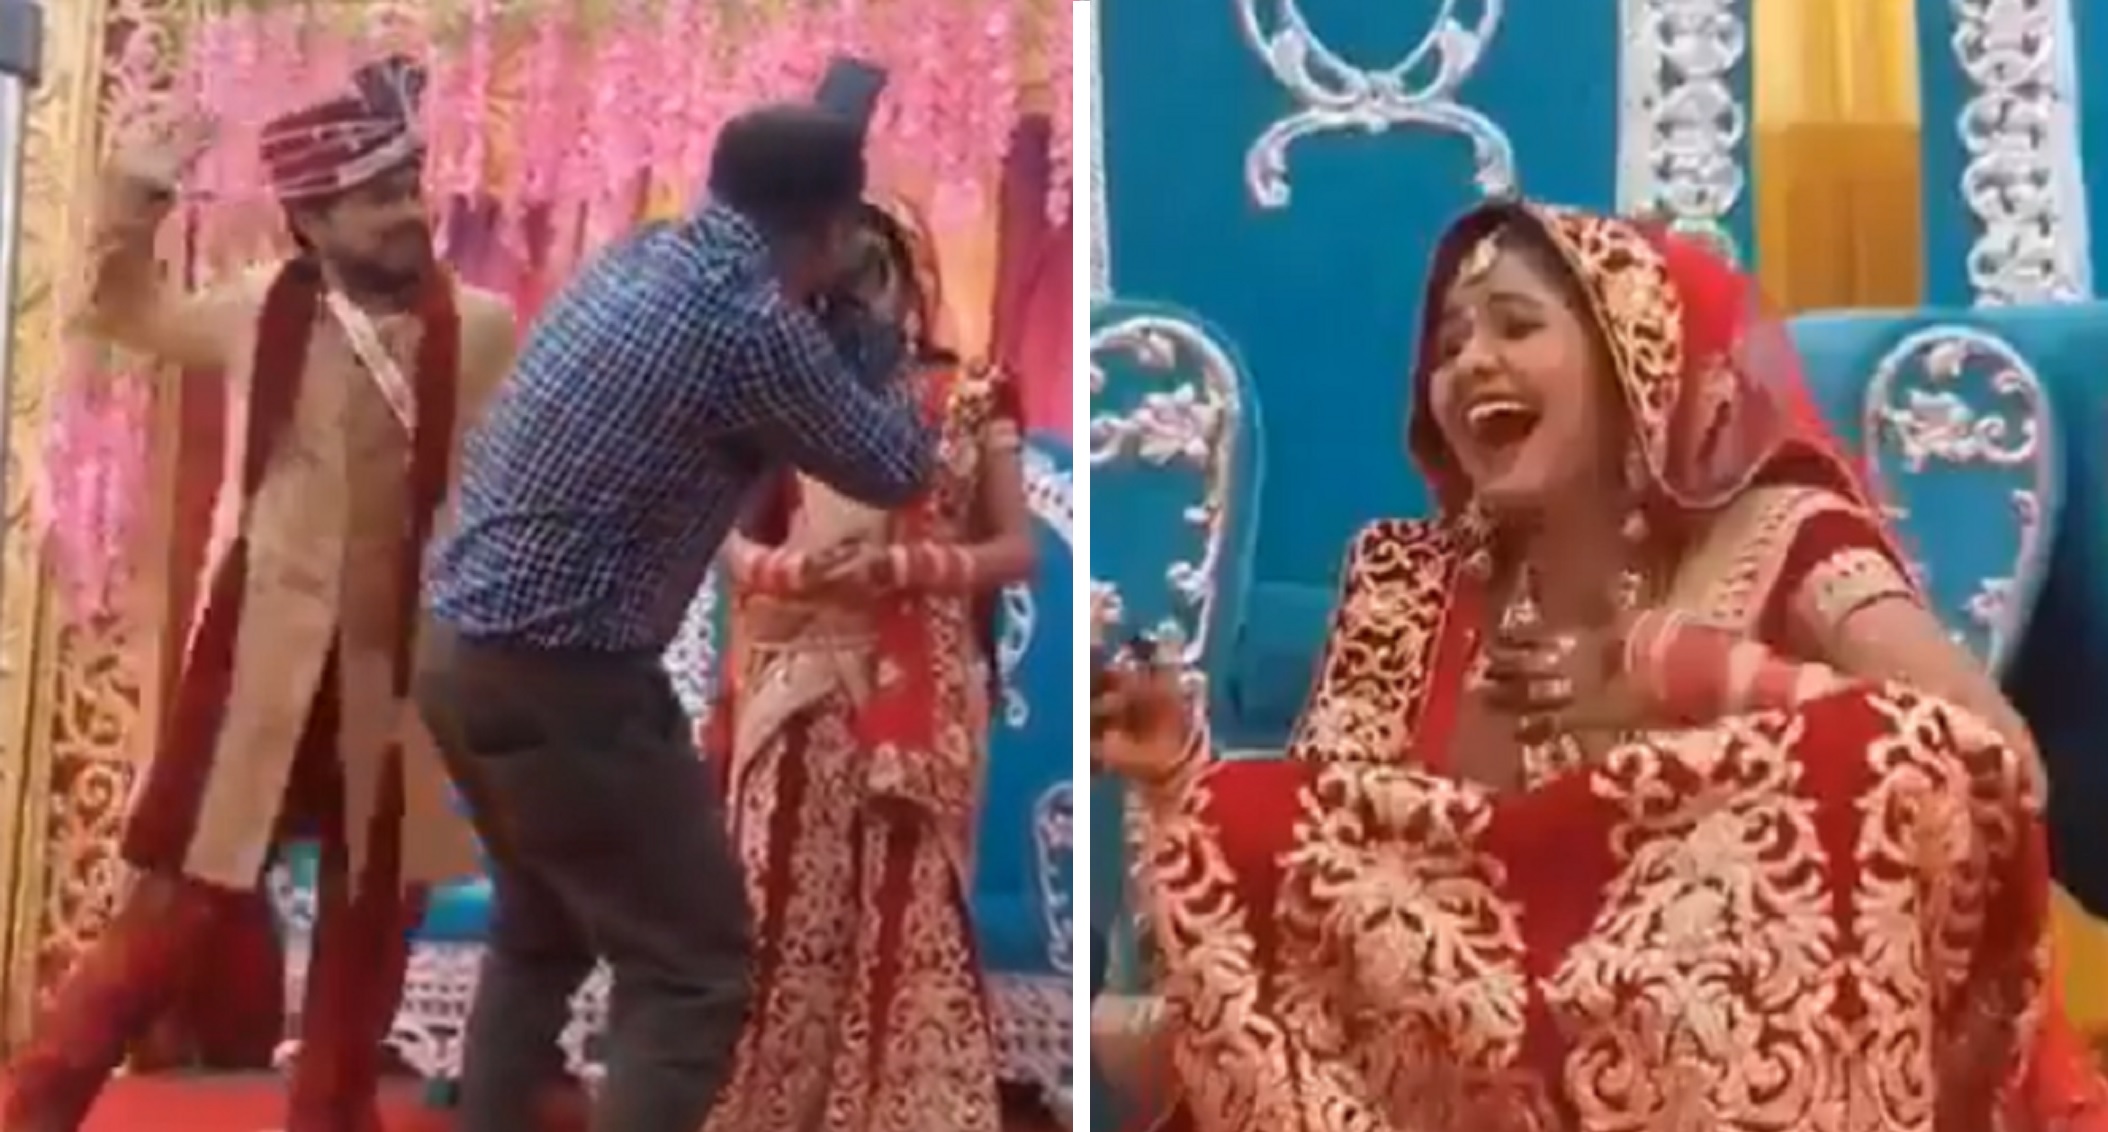 Viral: Groom Slaps Photographer For ‘Getting Too Close’ To Bride, She Falls Down Laughing Hysterically